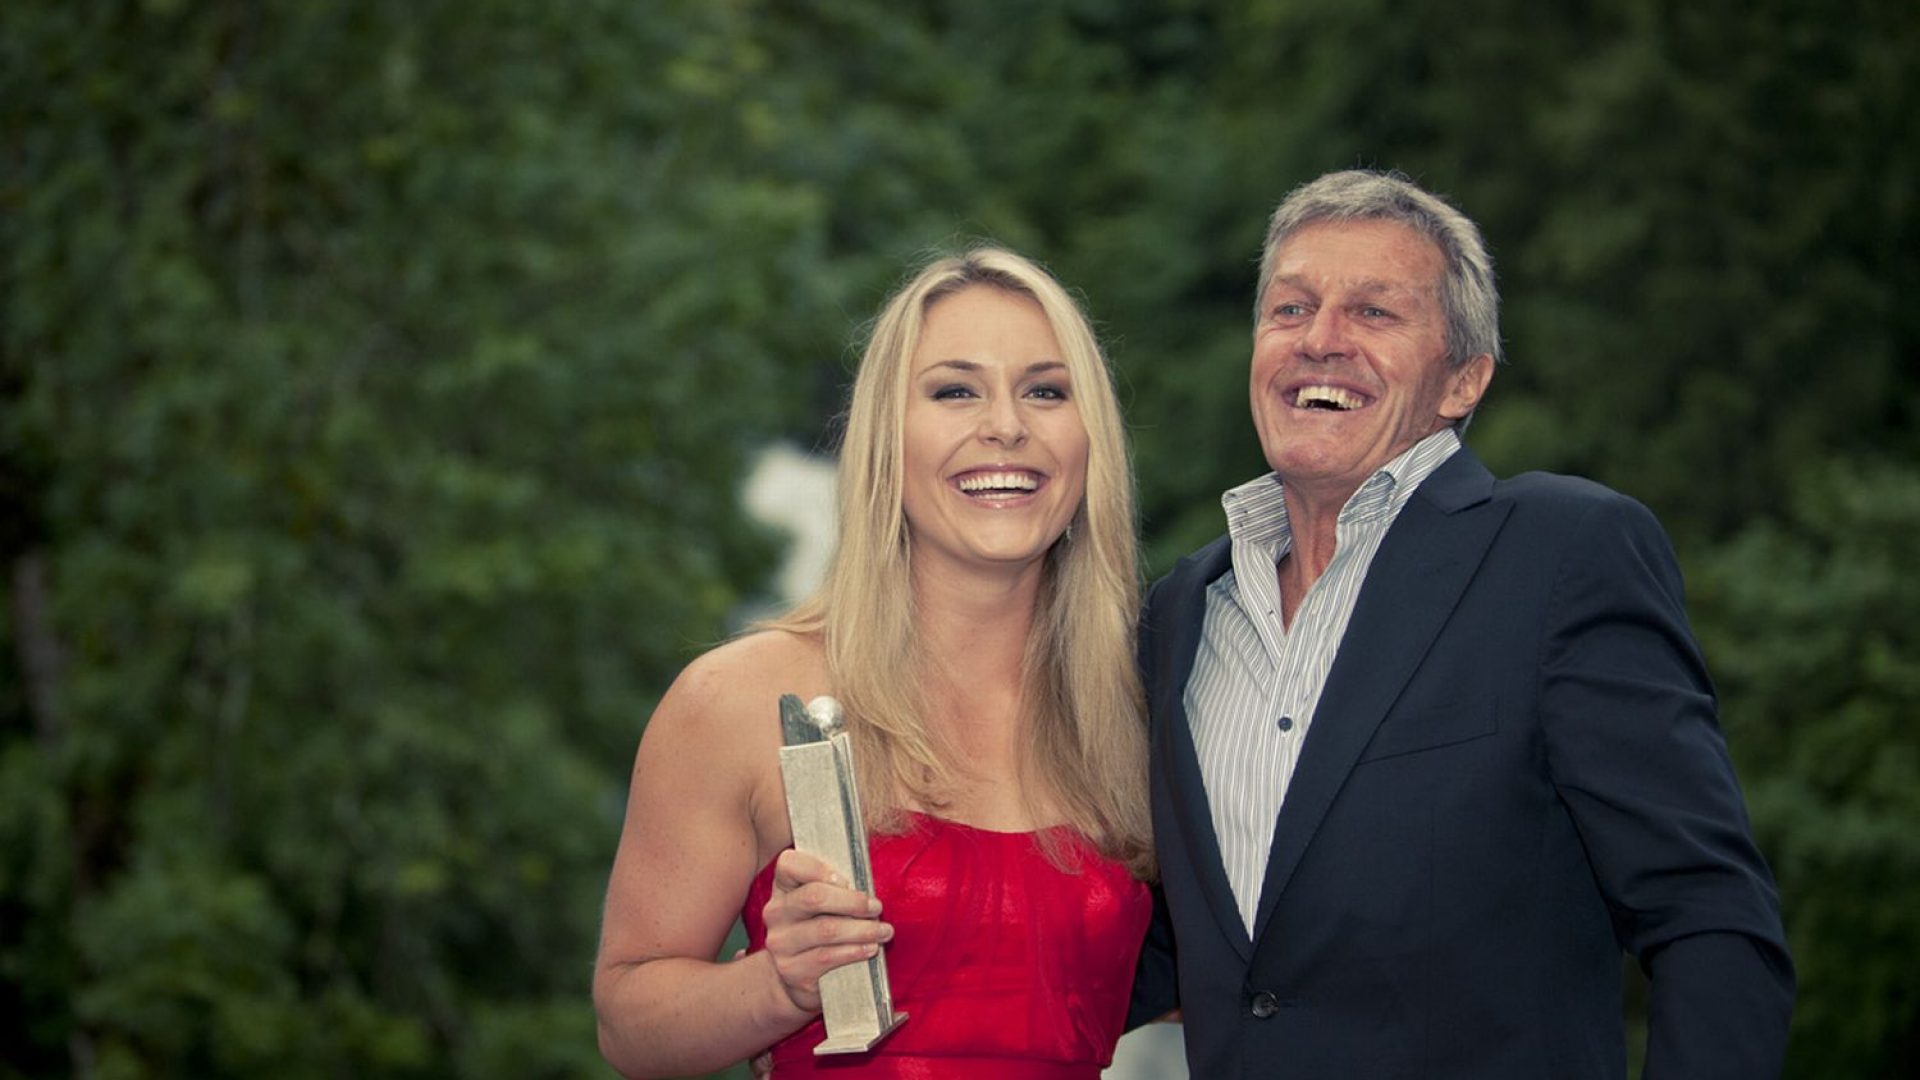 Lindsey Vonn receives "Preis Herbert" for her work in promoting the Alps and the sport of alpine skiing. Lindsey is the first female, first non-European and the youngest person ever to receive this award. Swiss skiing legend Berhard Russi, who received the award back in 2001, celebrates with her.